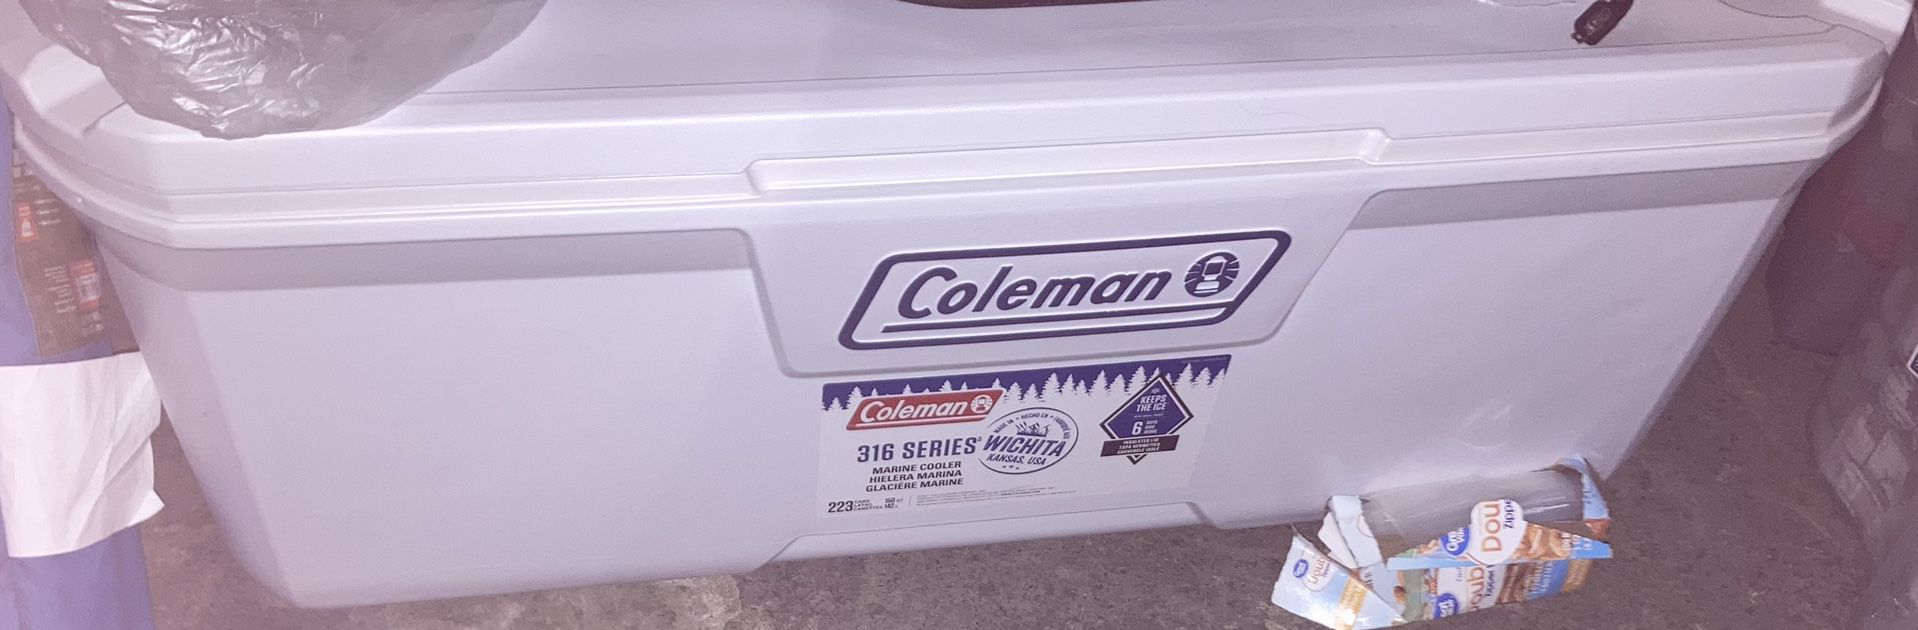 White Coleman Cooler